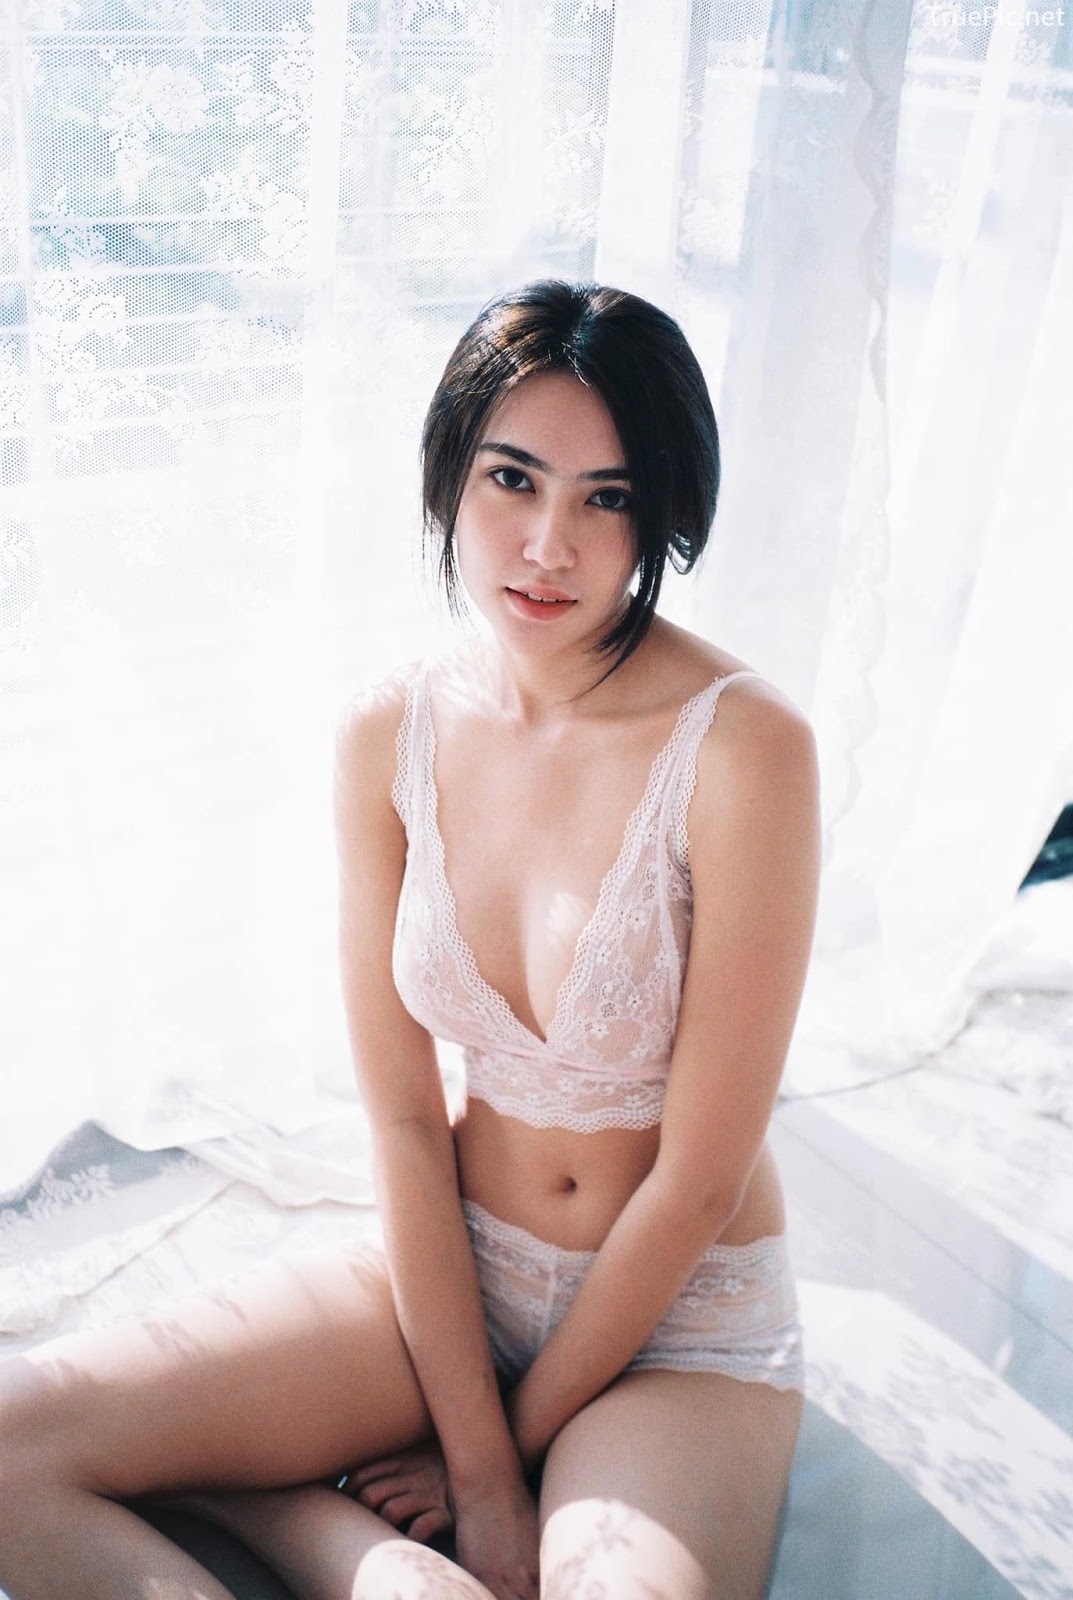 Thailand Hot model - Baifern Rinrucha Kamnark - Sexy in Transparent Lace Lingerie - TruePic.net - Picture 20